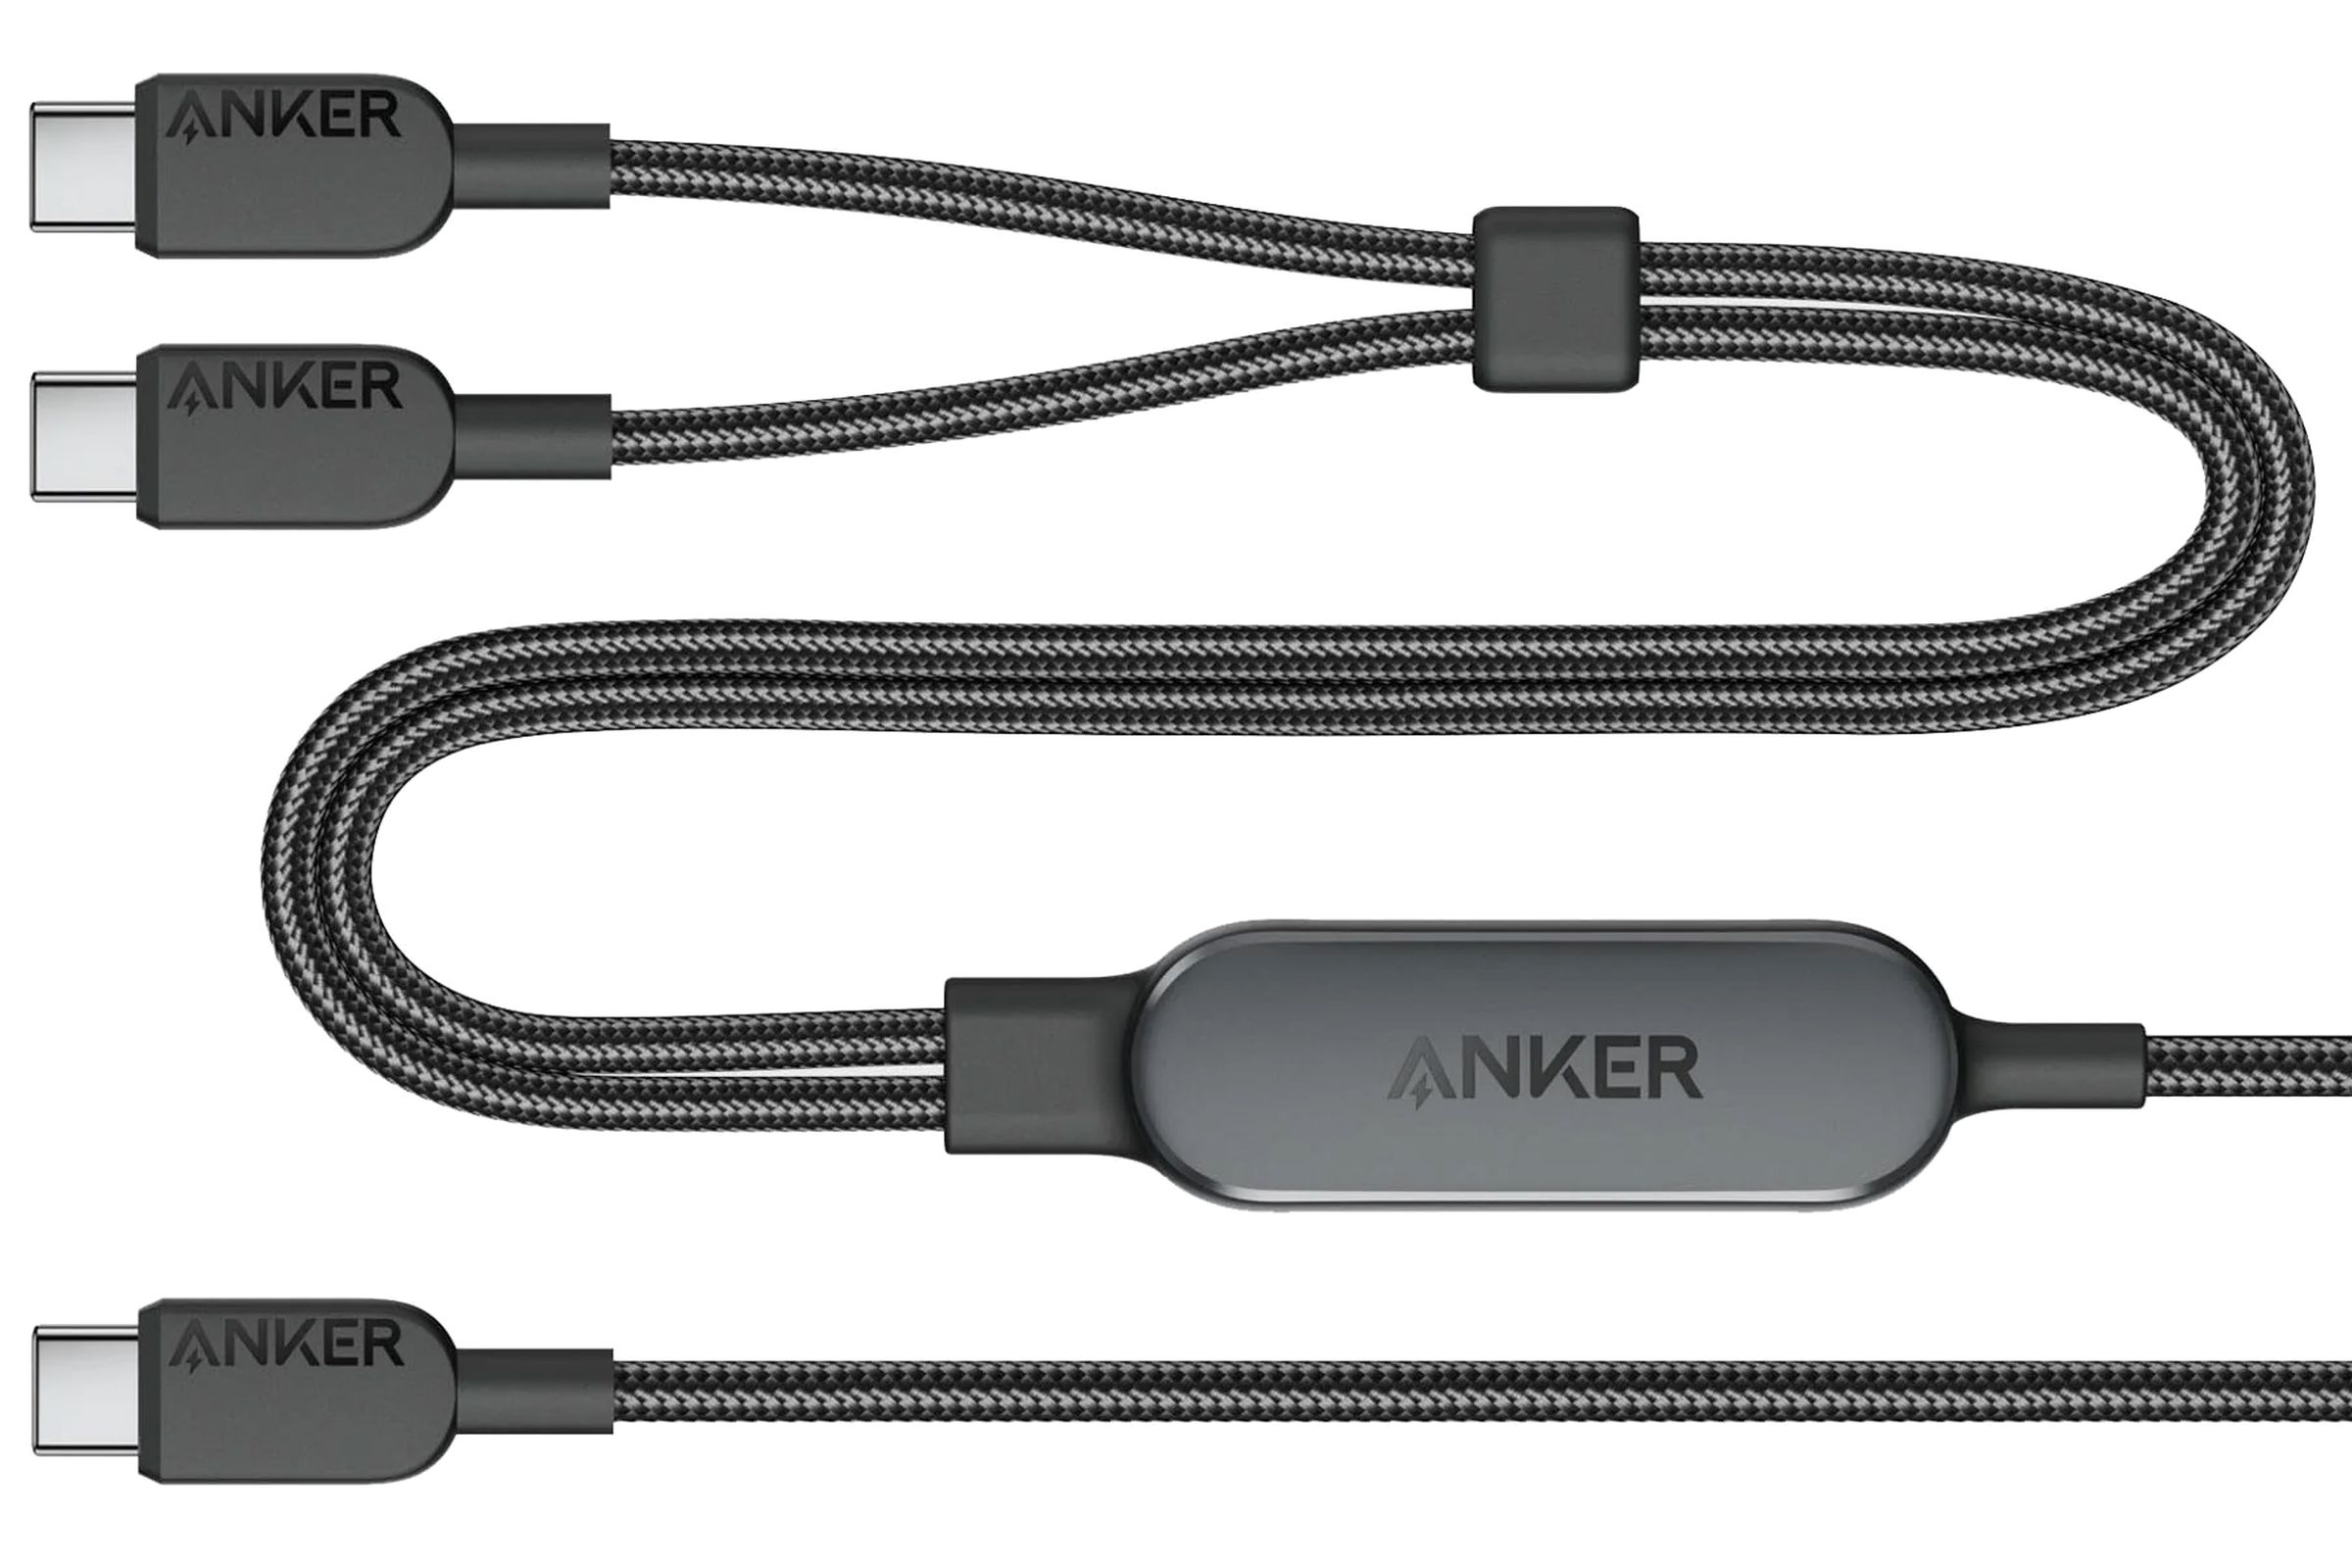 The Anker 2-in-1 USB-C cable against a white background.